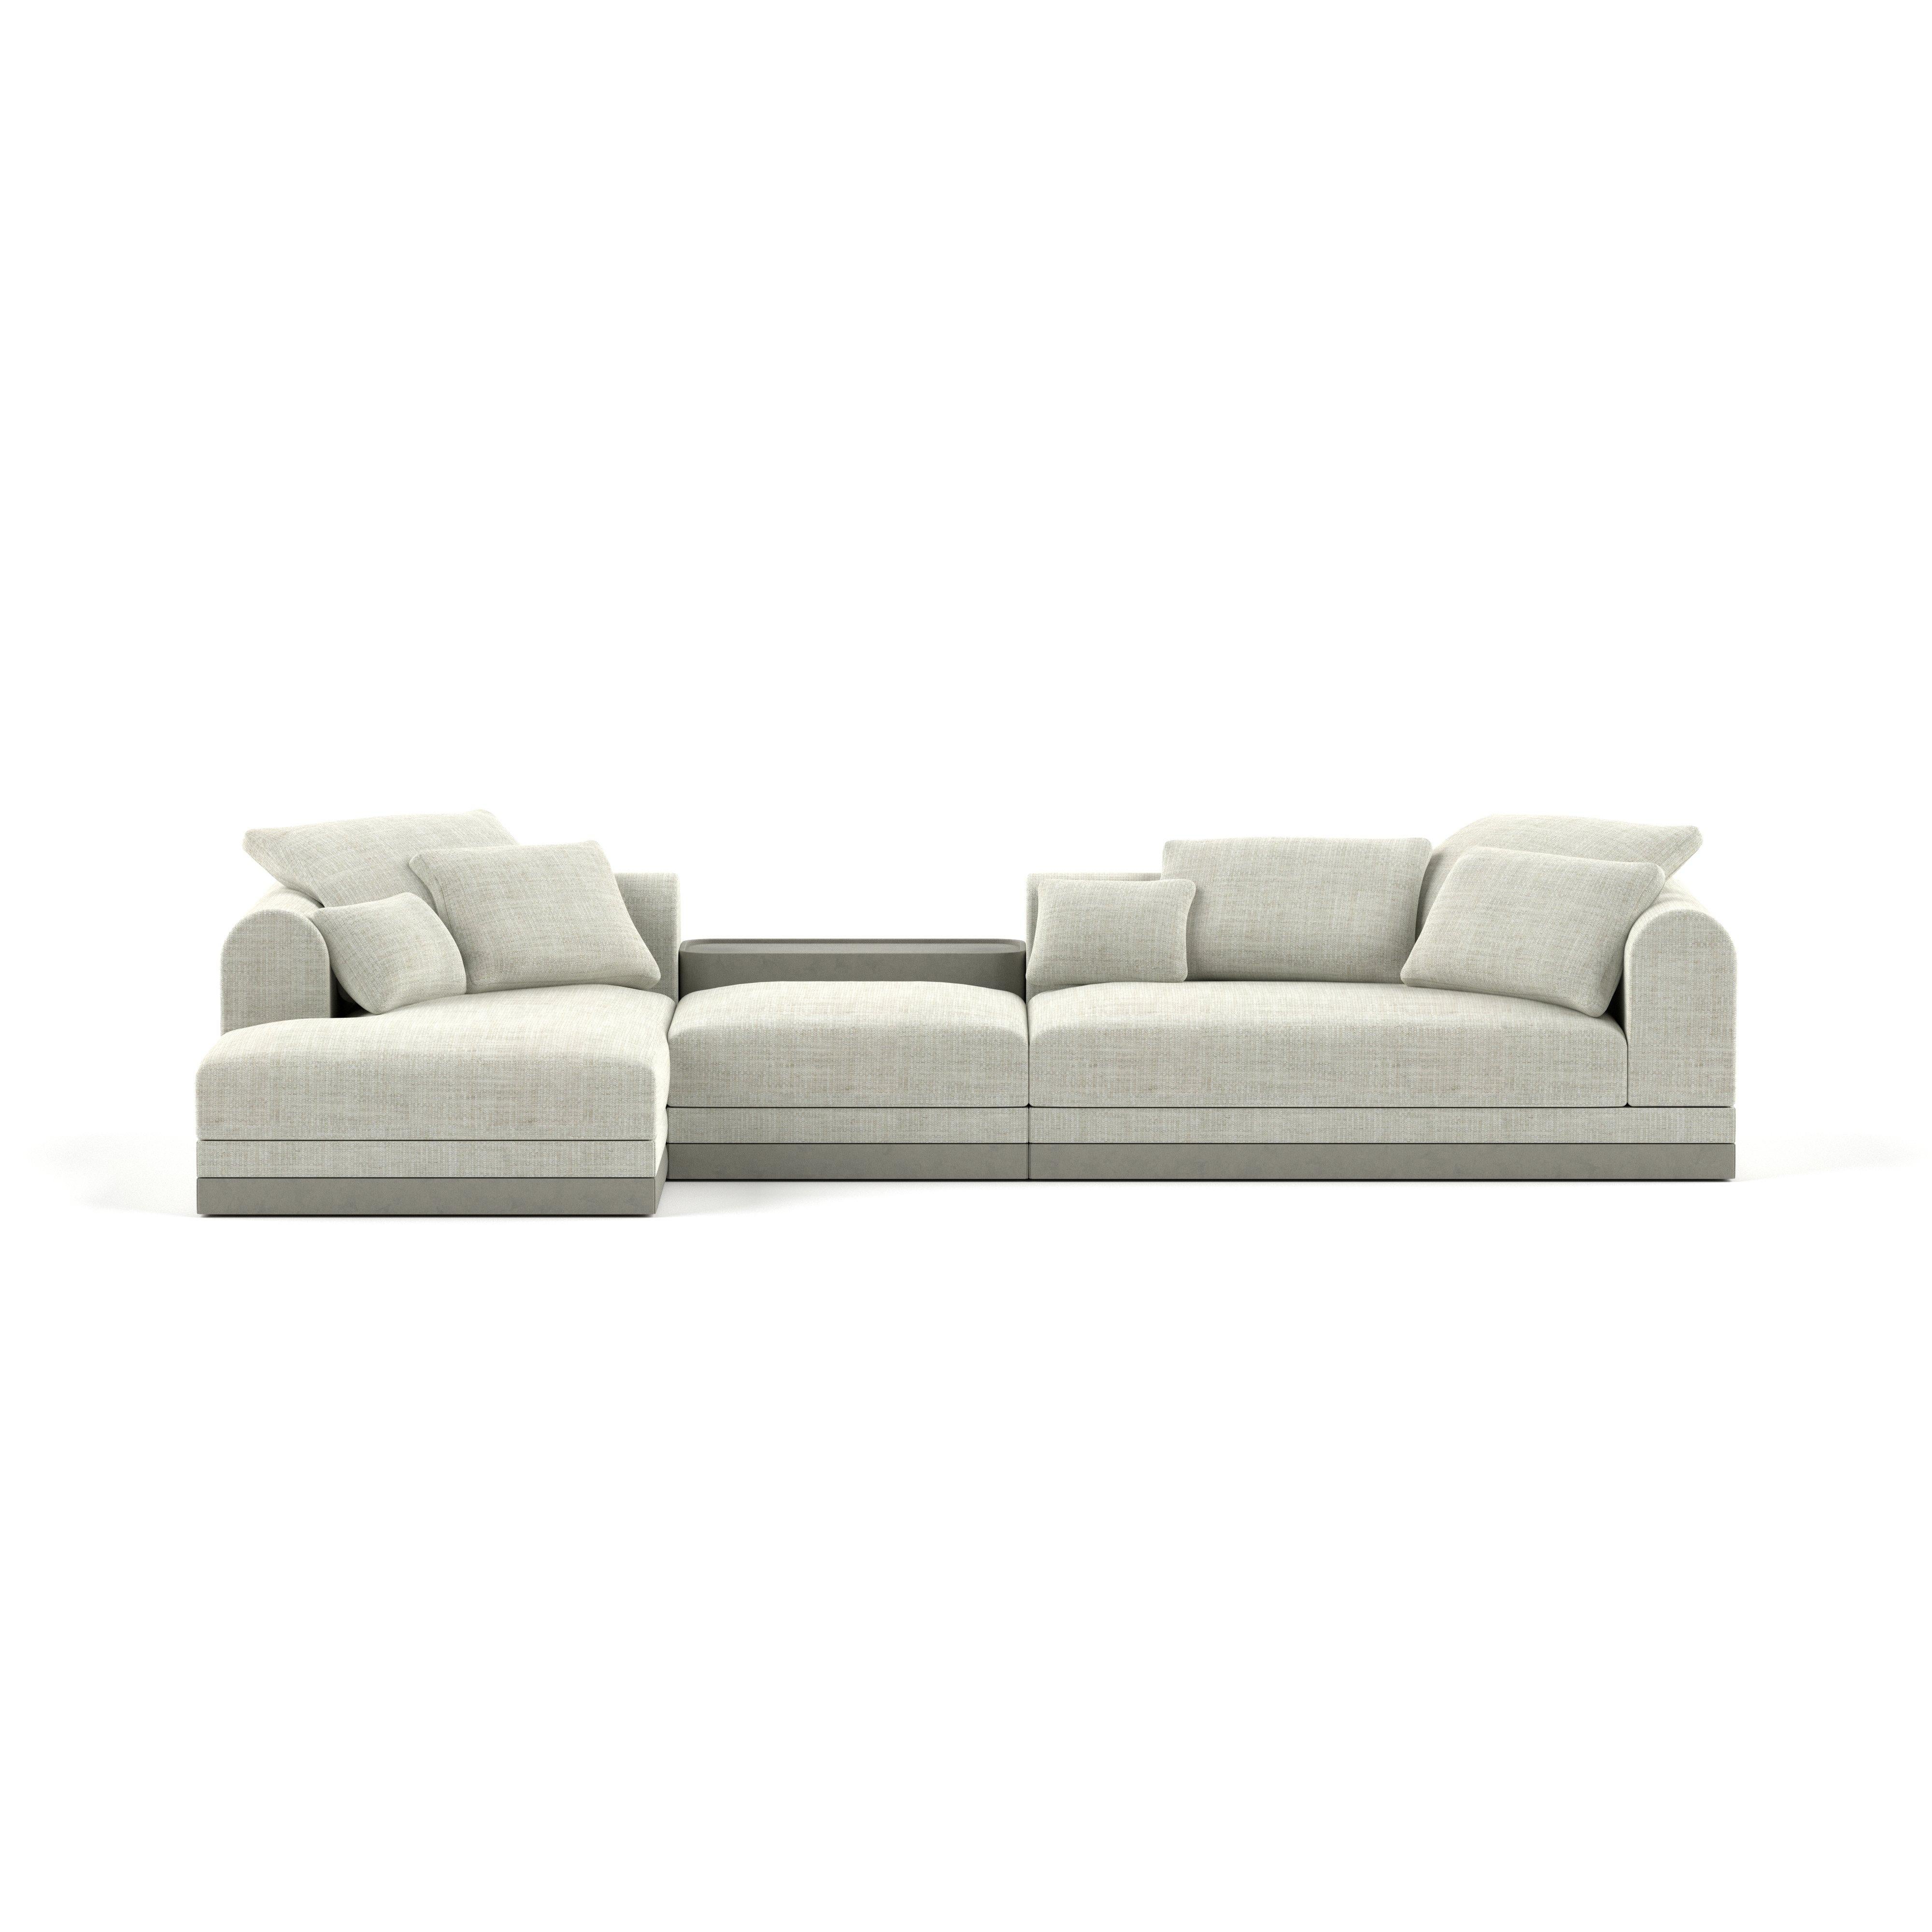 'Aqueduct' Contemporary Sofa by Poiat, Setup 3, Yang 95, Low Plinth For Sale 3